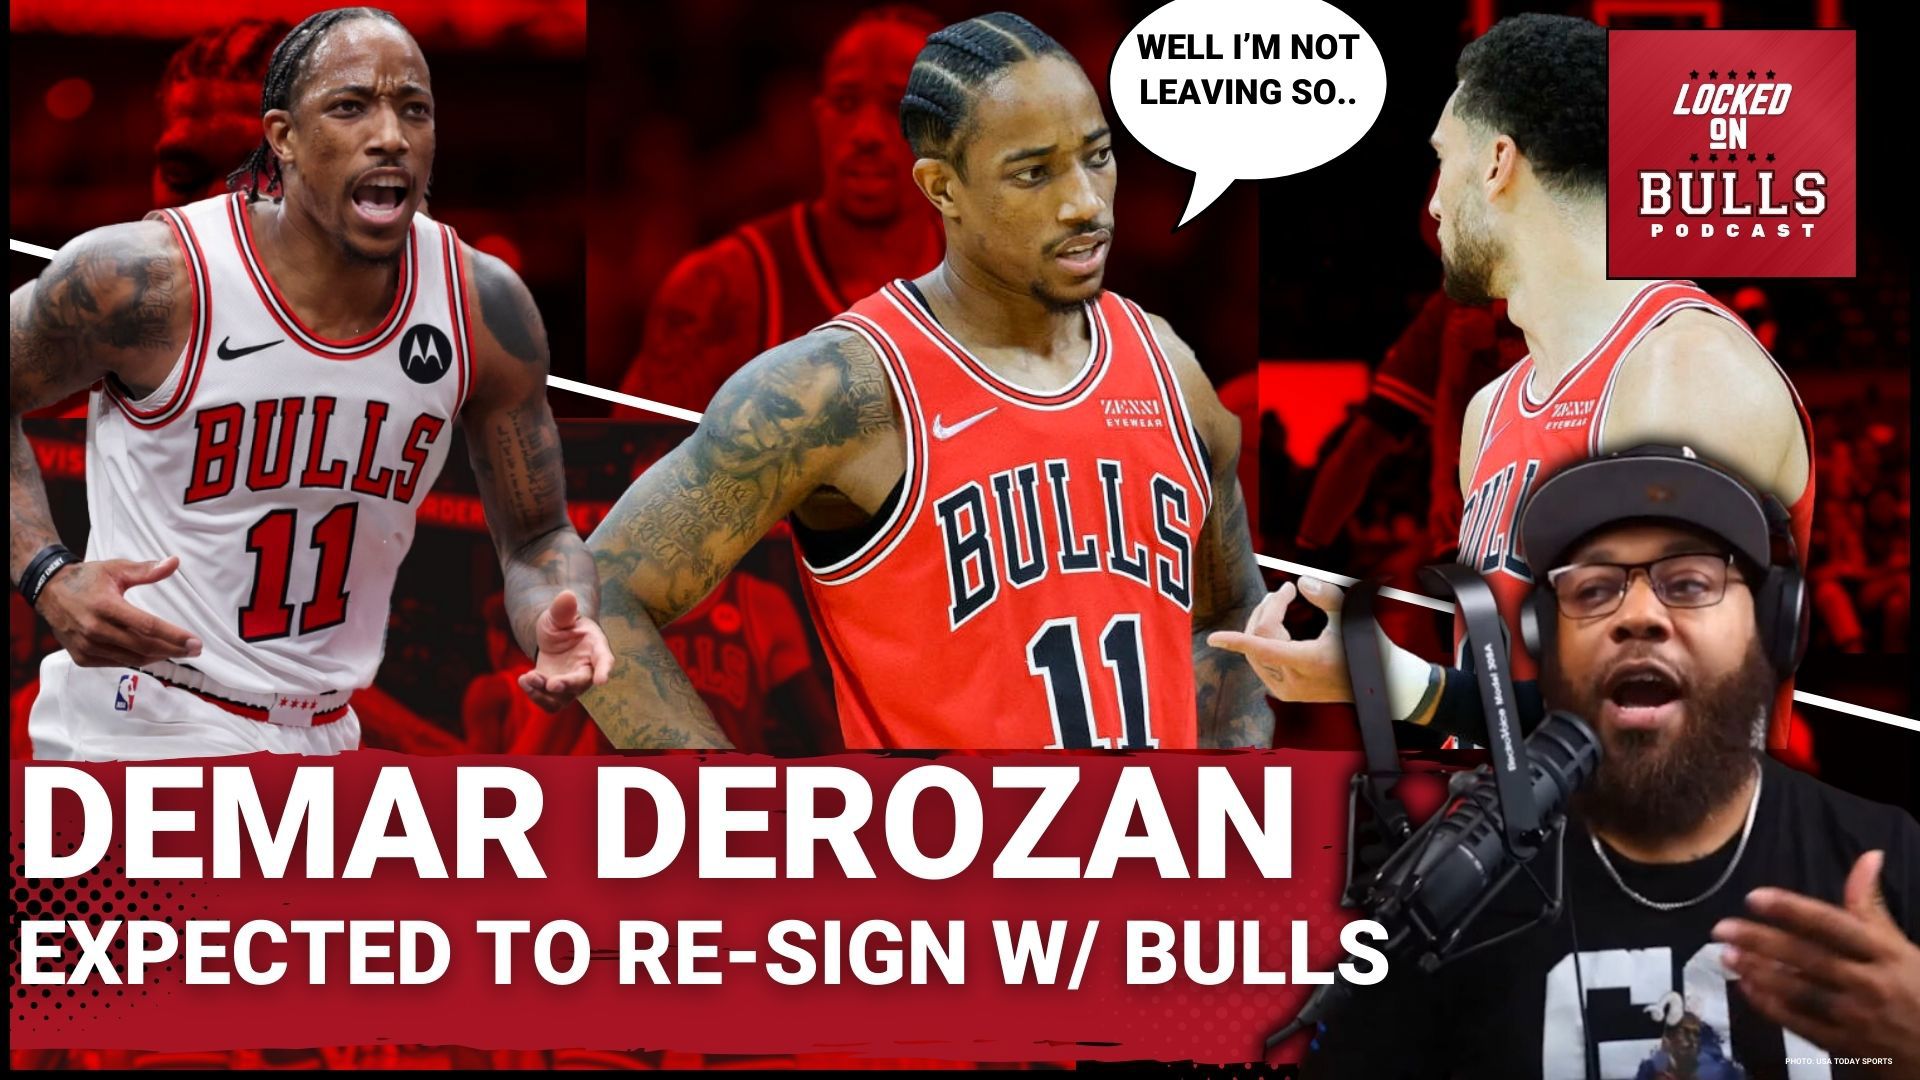 Haize reacts to Michael Scotto's report that DeMar DeRozan is expected to re-sign with the Bulls according to NBA exes. He also talks about KC Johnson's reports